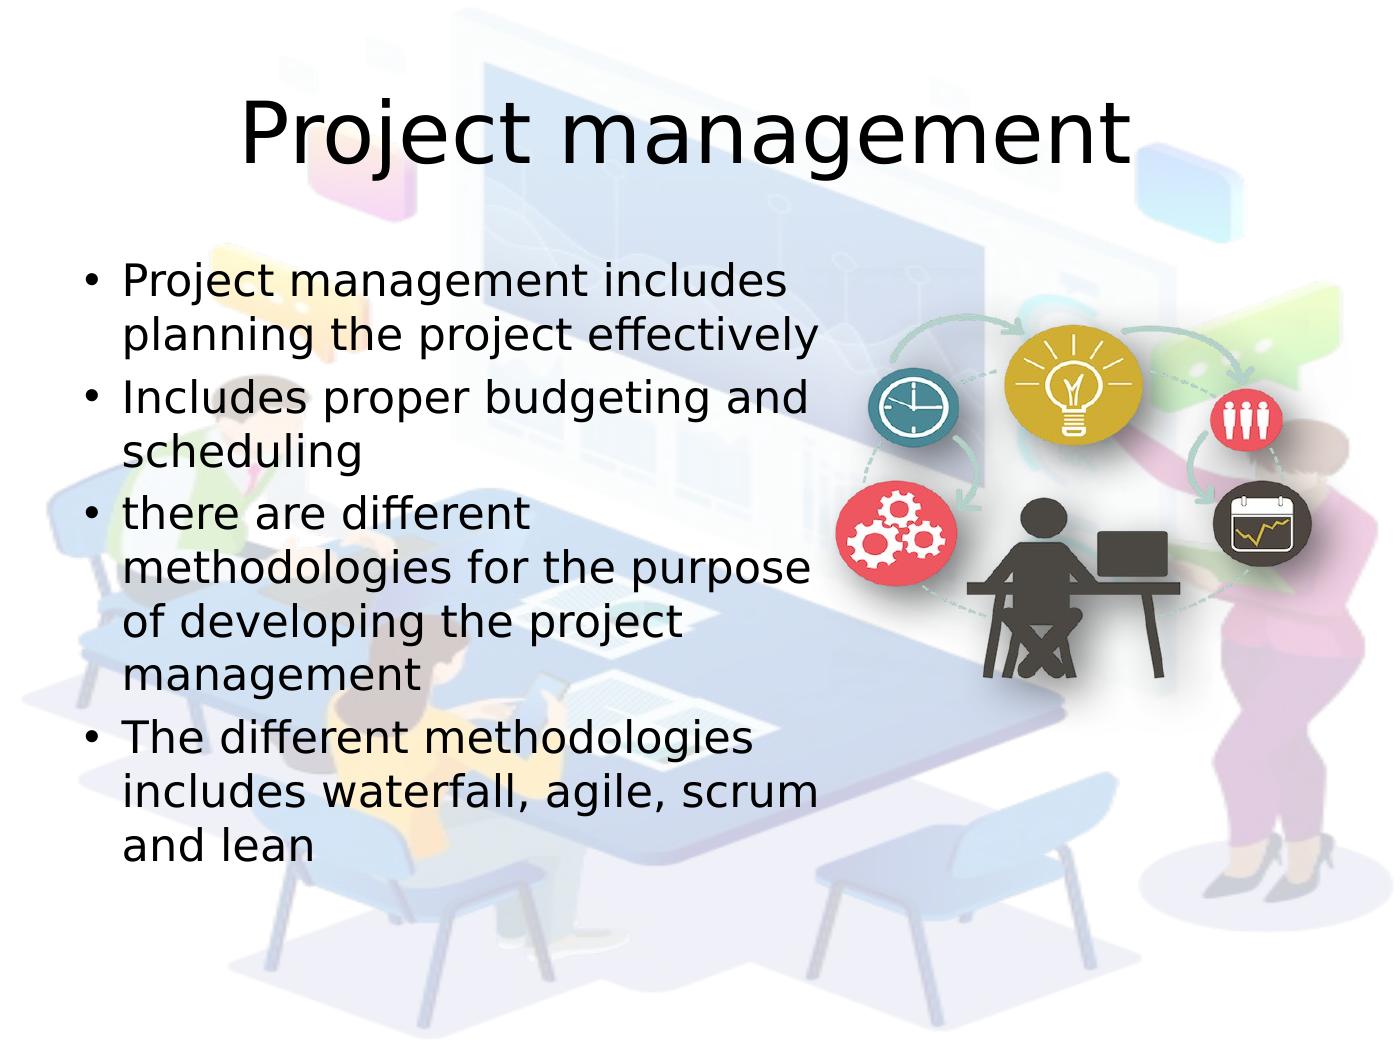 Project management methodologies | Assignment 1_2